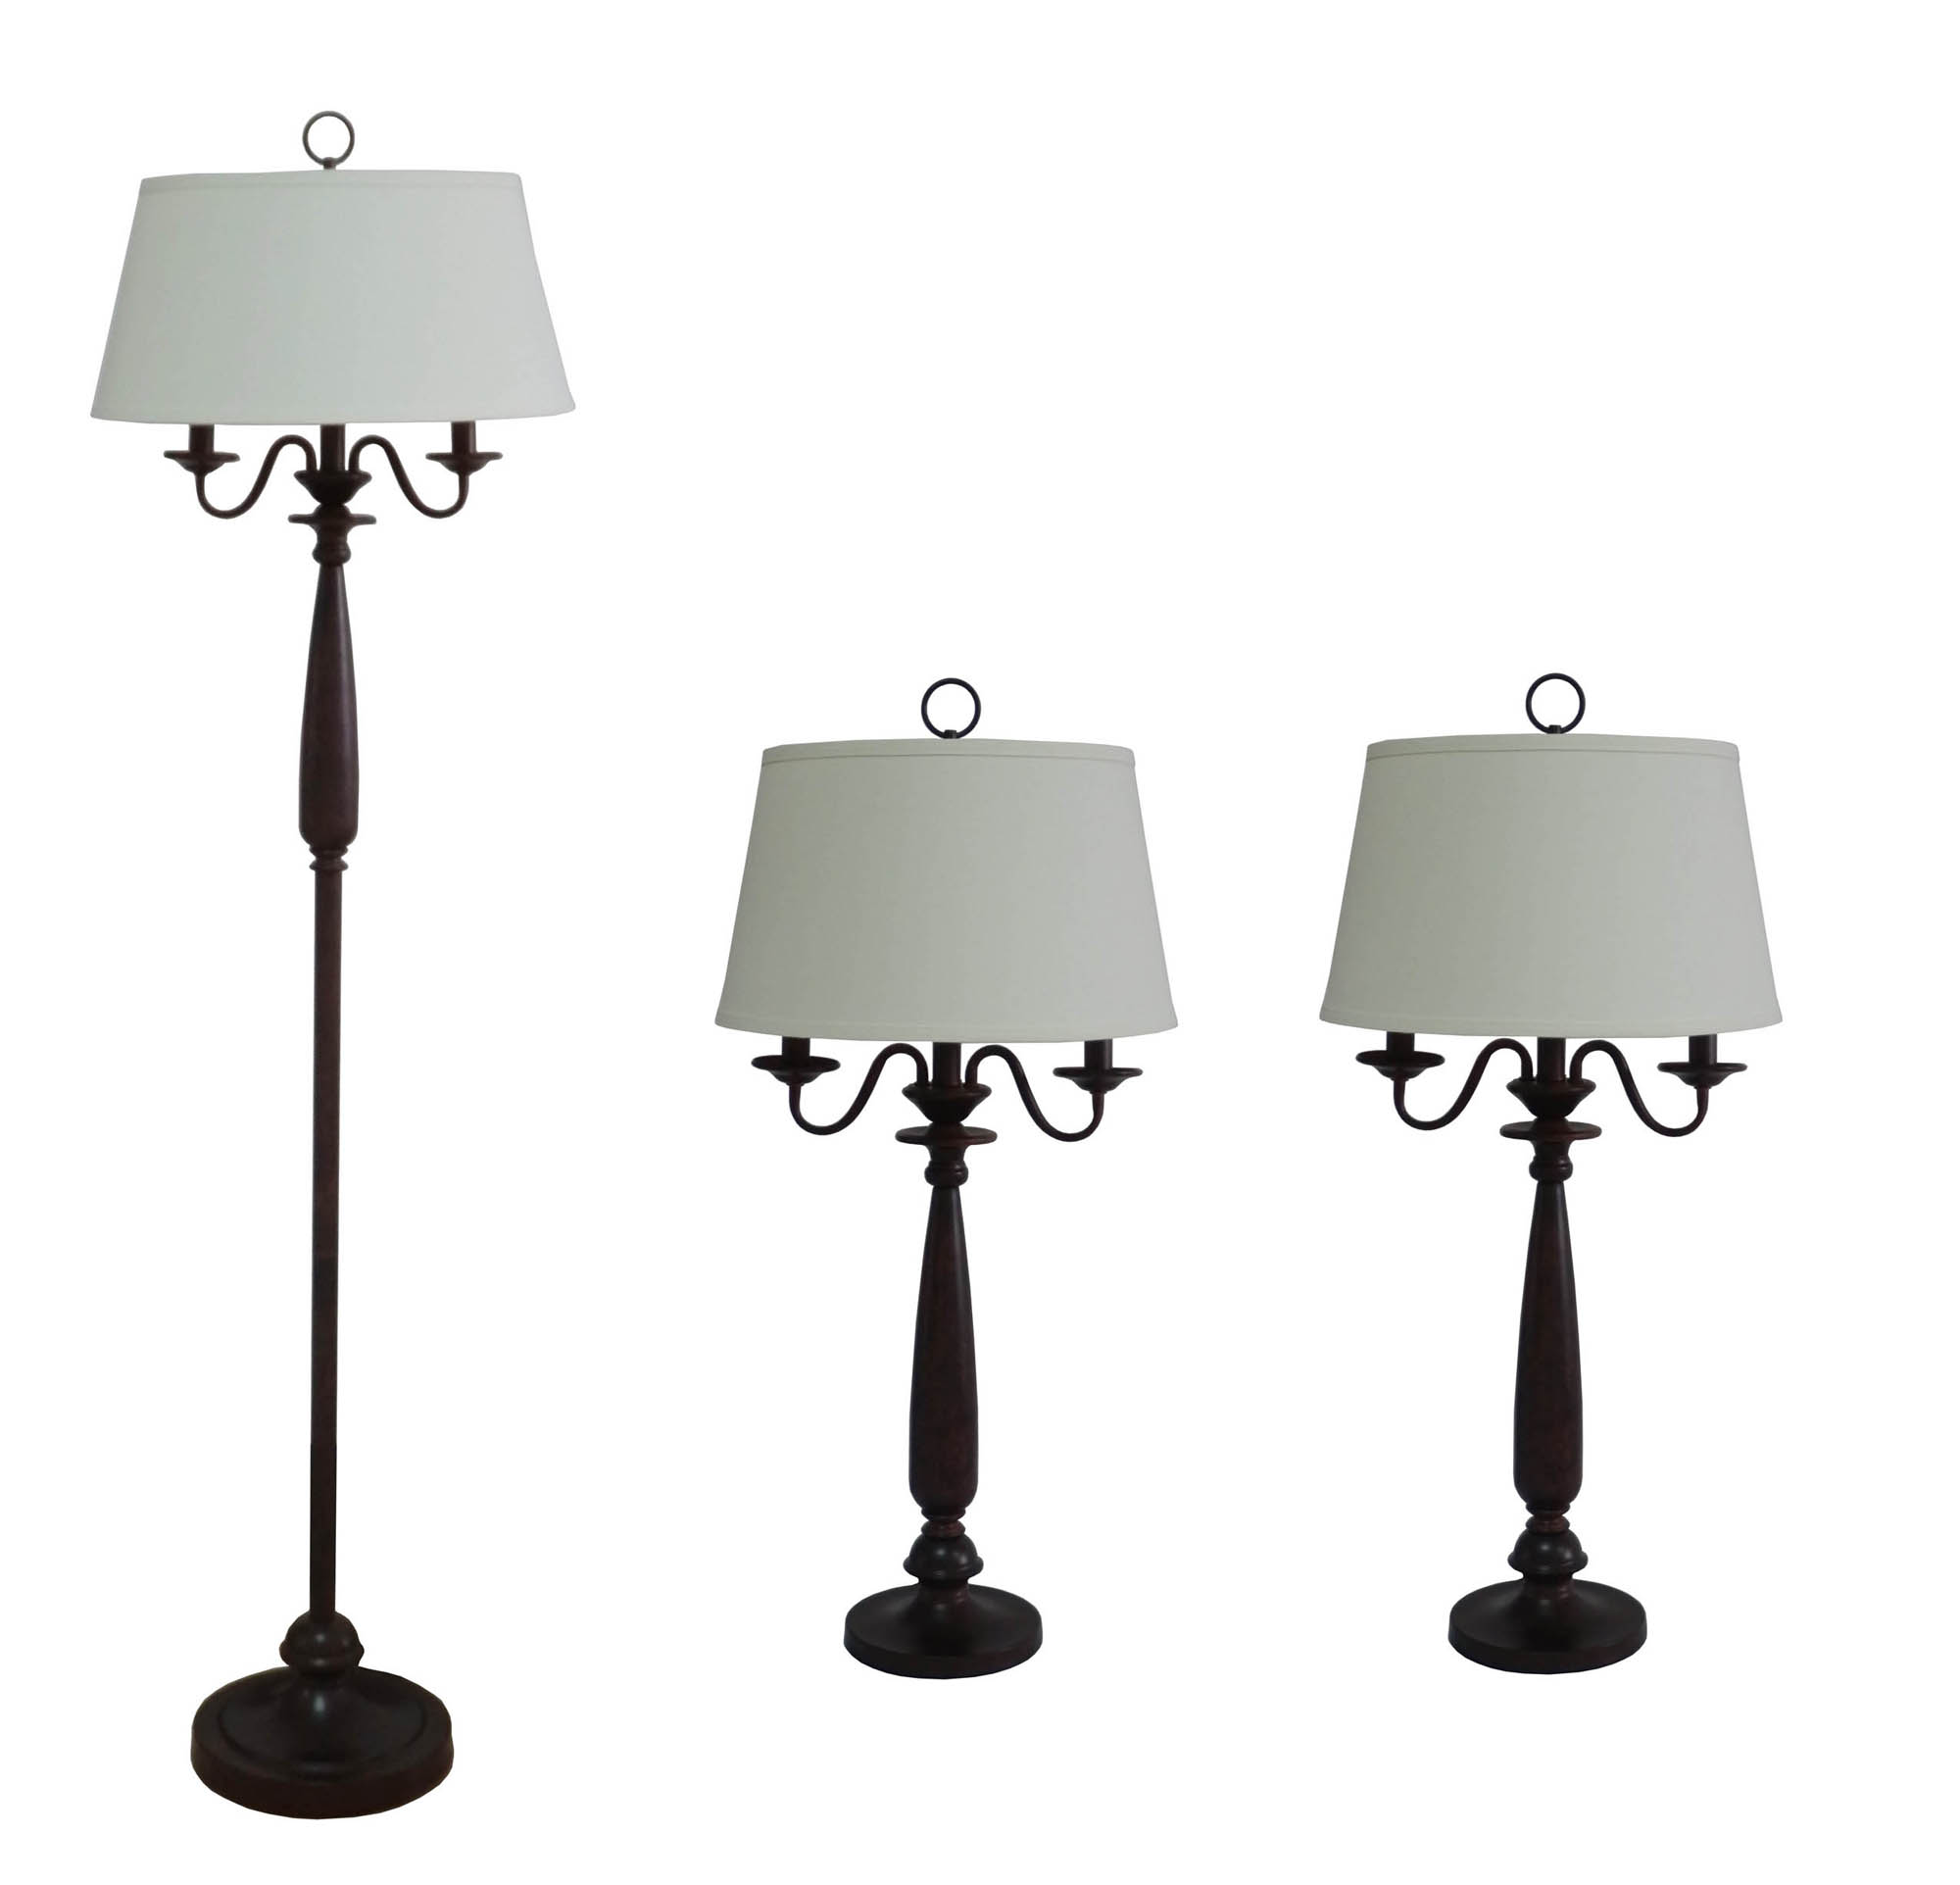 3 Piece Metal & Resin Lamp Set with Antique Brown Finish.